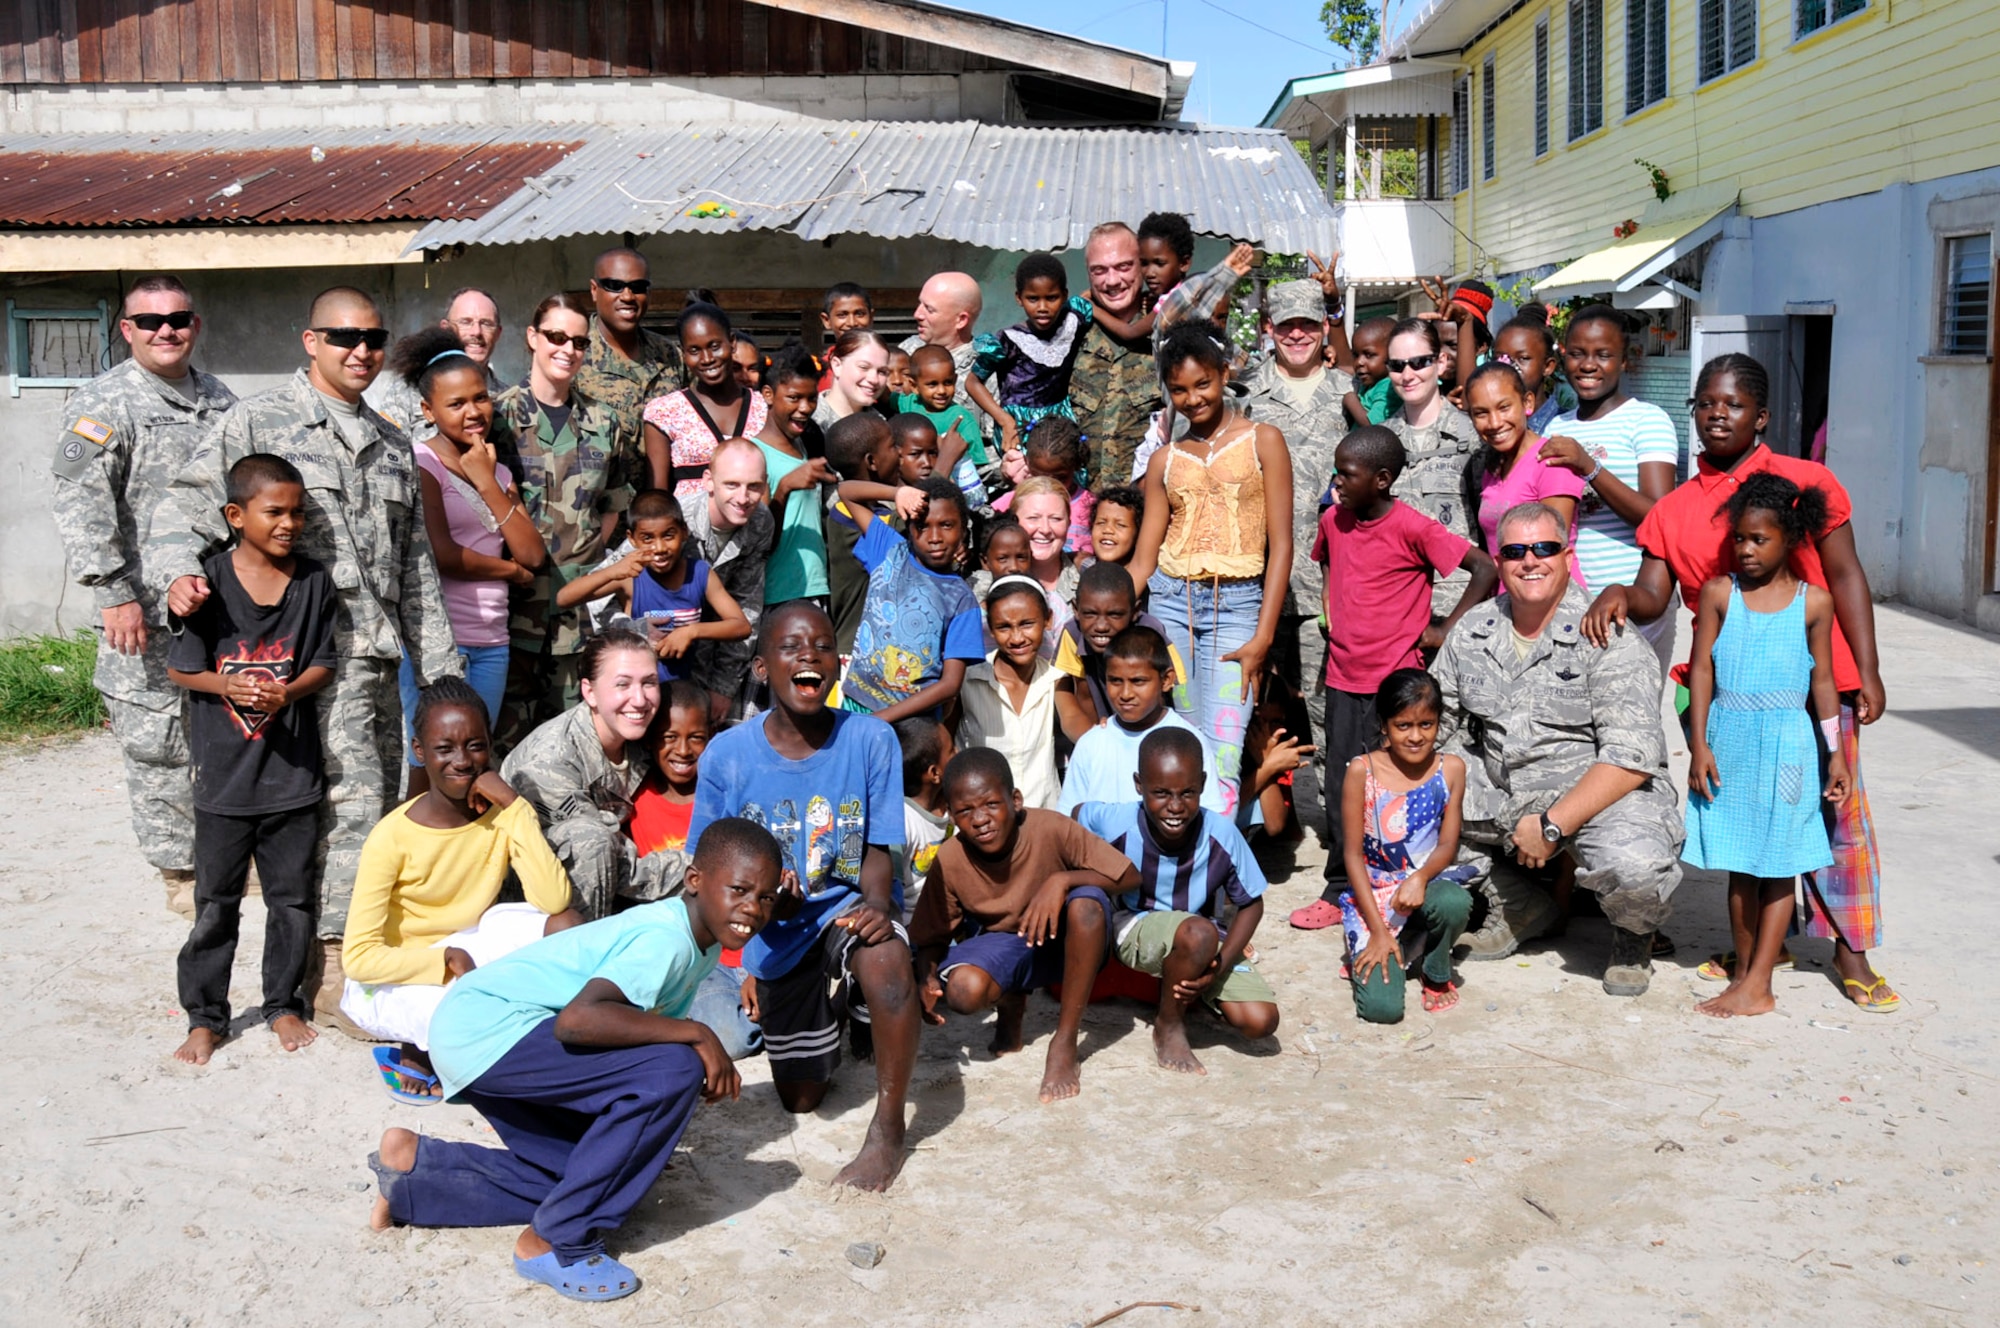 Members of Joint Task Force Guyana pose for a group photo with the children of Joshua's Place orphanage, July 5, 2009 in Georgetown, Guyana. Airmen, Marines, and Soldiers visited the orphanage to get information on what kind of support JTF Guyana can provide. (U.S. Air Force photo by Airman 1st Class Perry Aston)